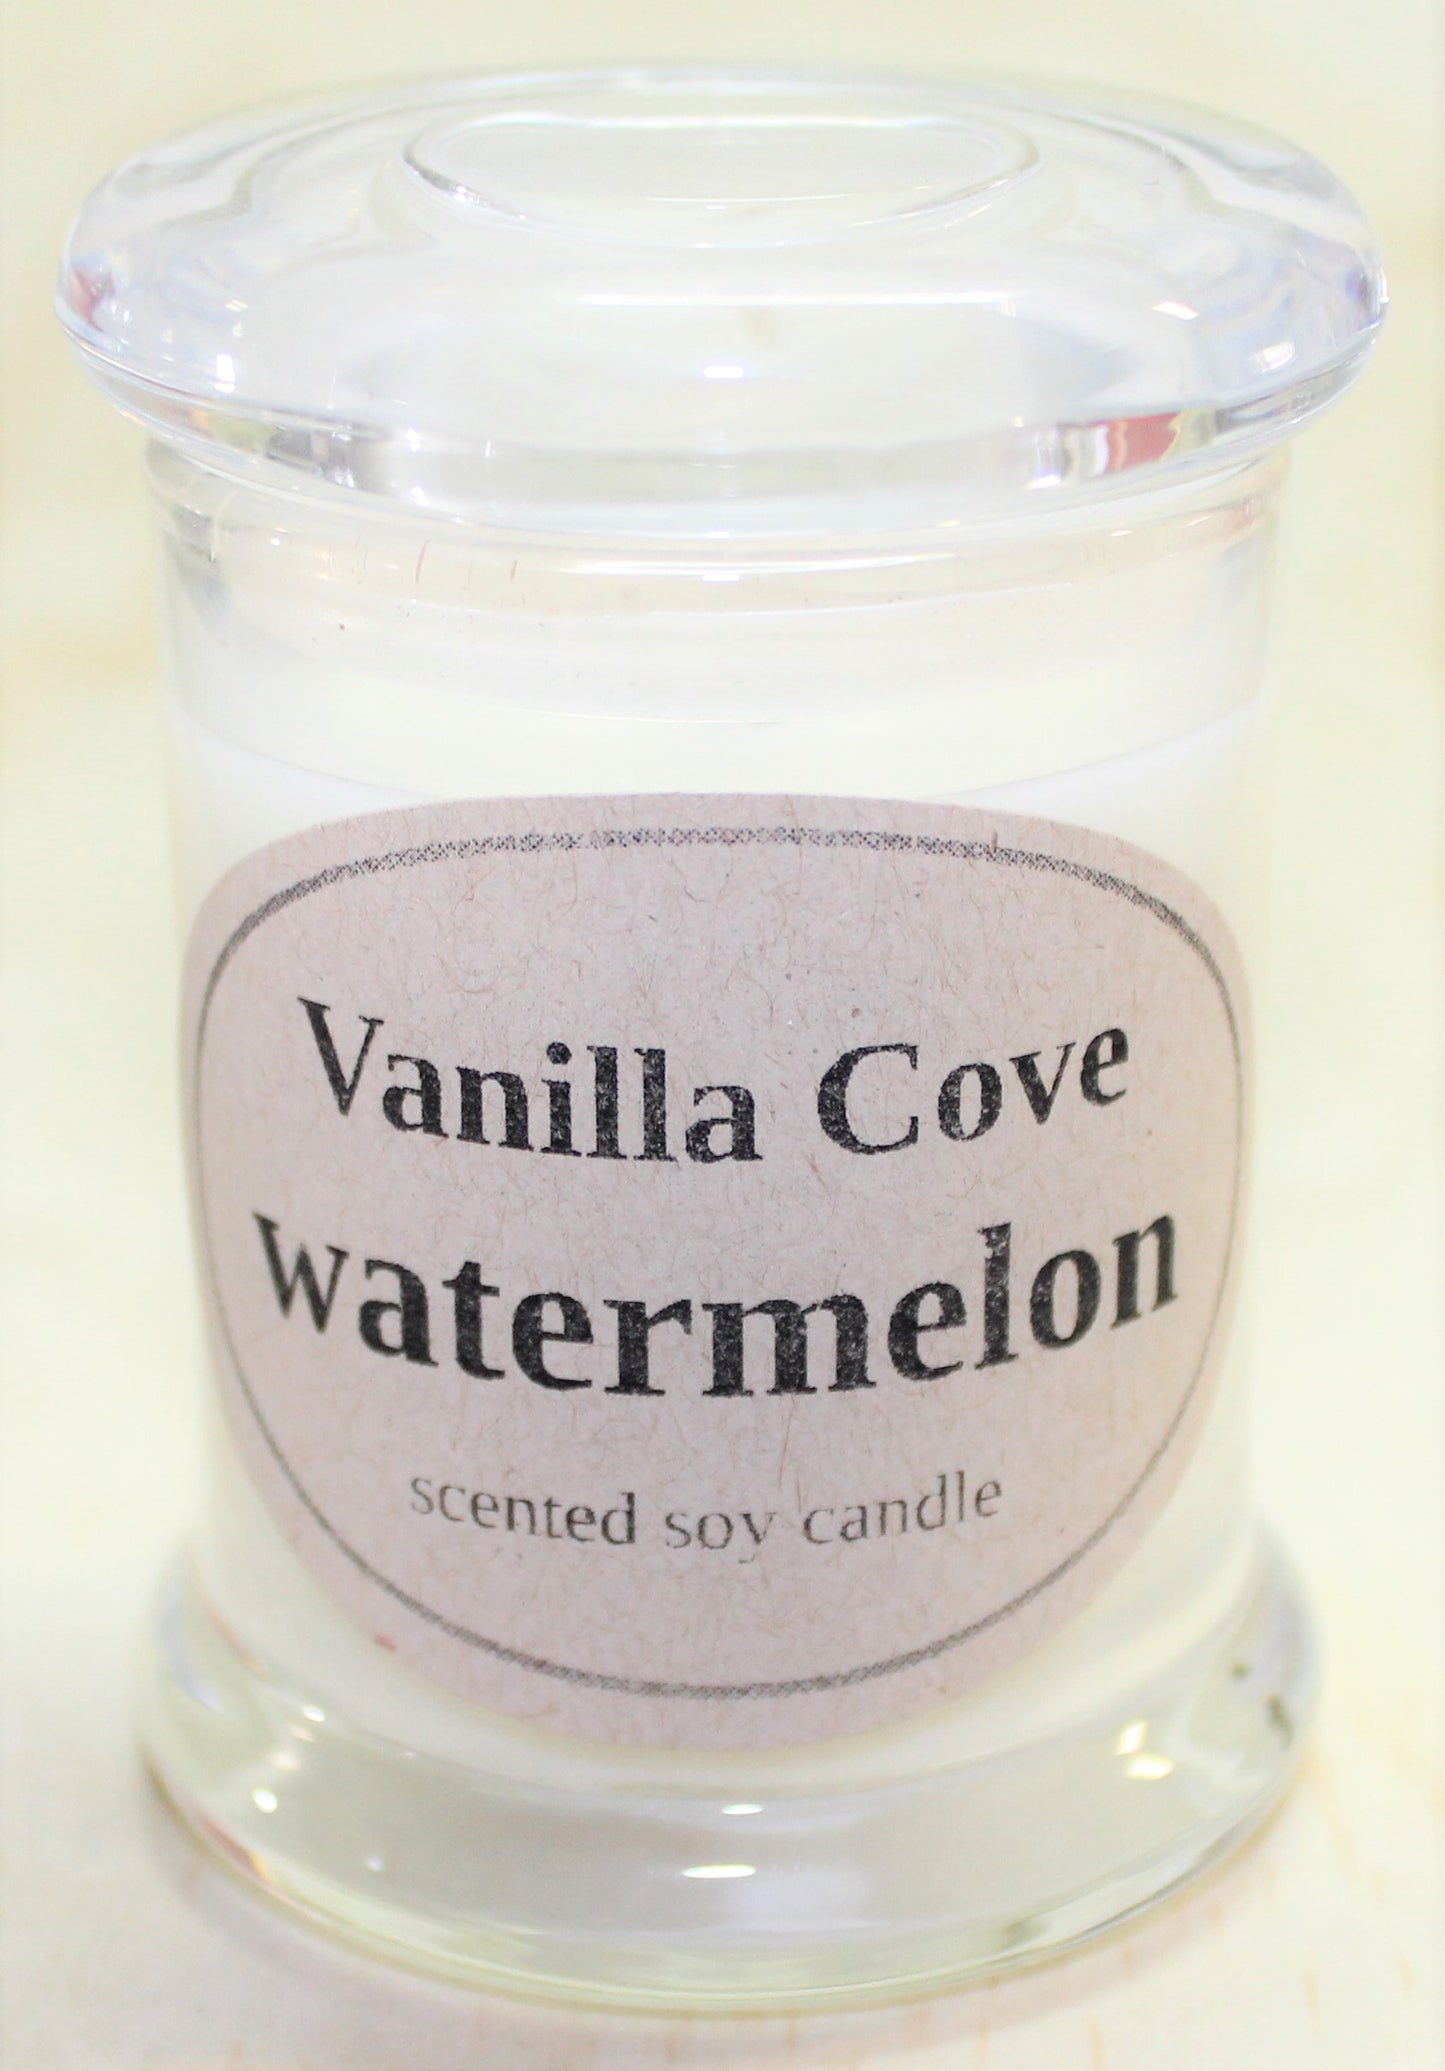 Vanilla Cove Soy Candle 20 hour Watermelon fragrance clear glass jar and glass lid